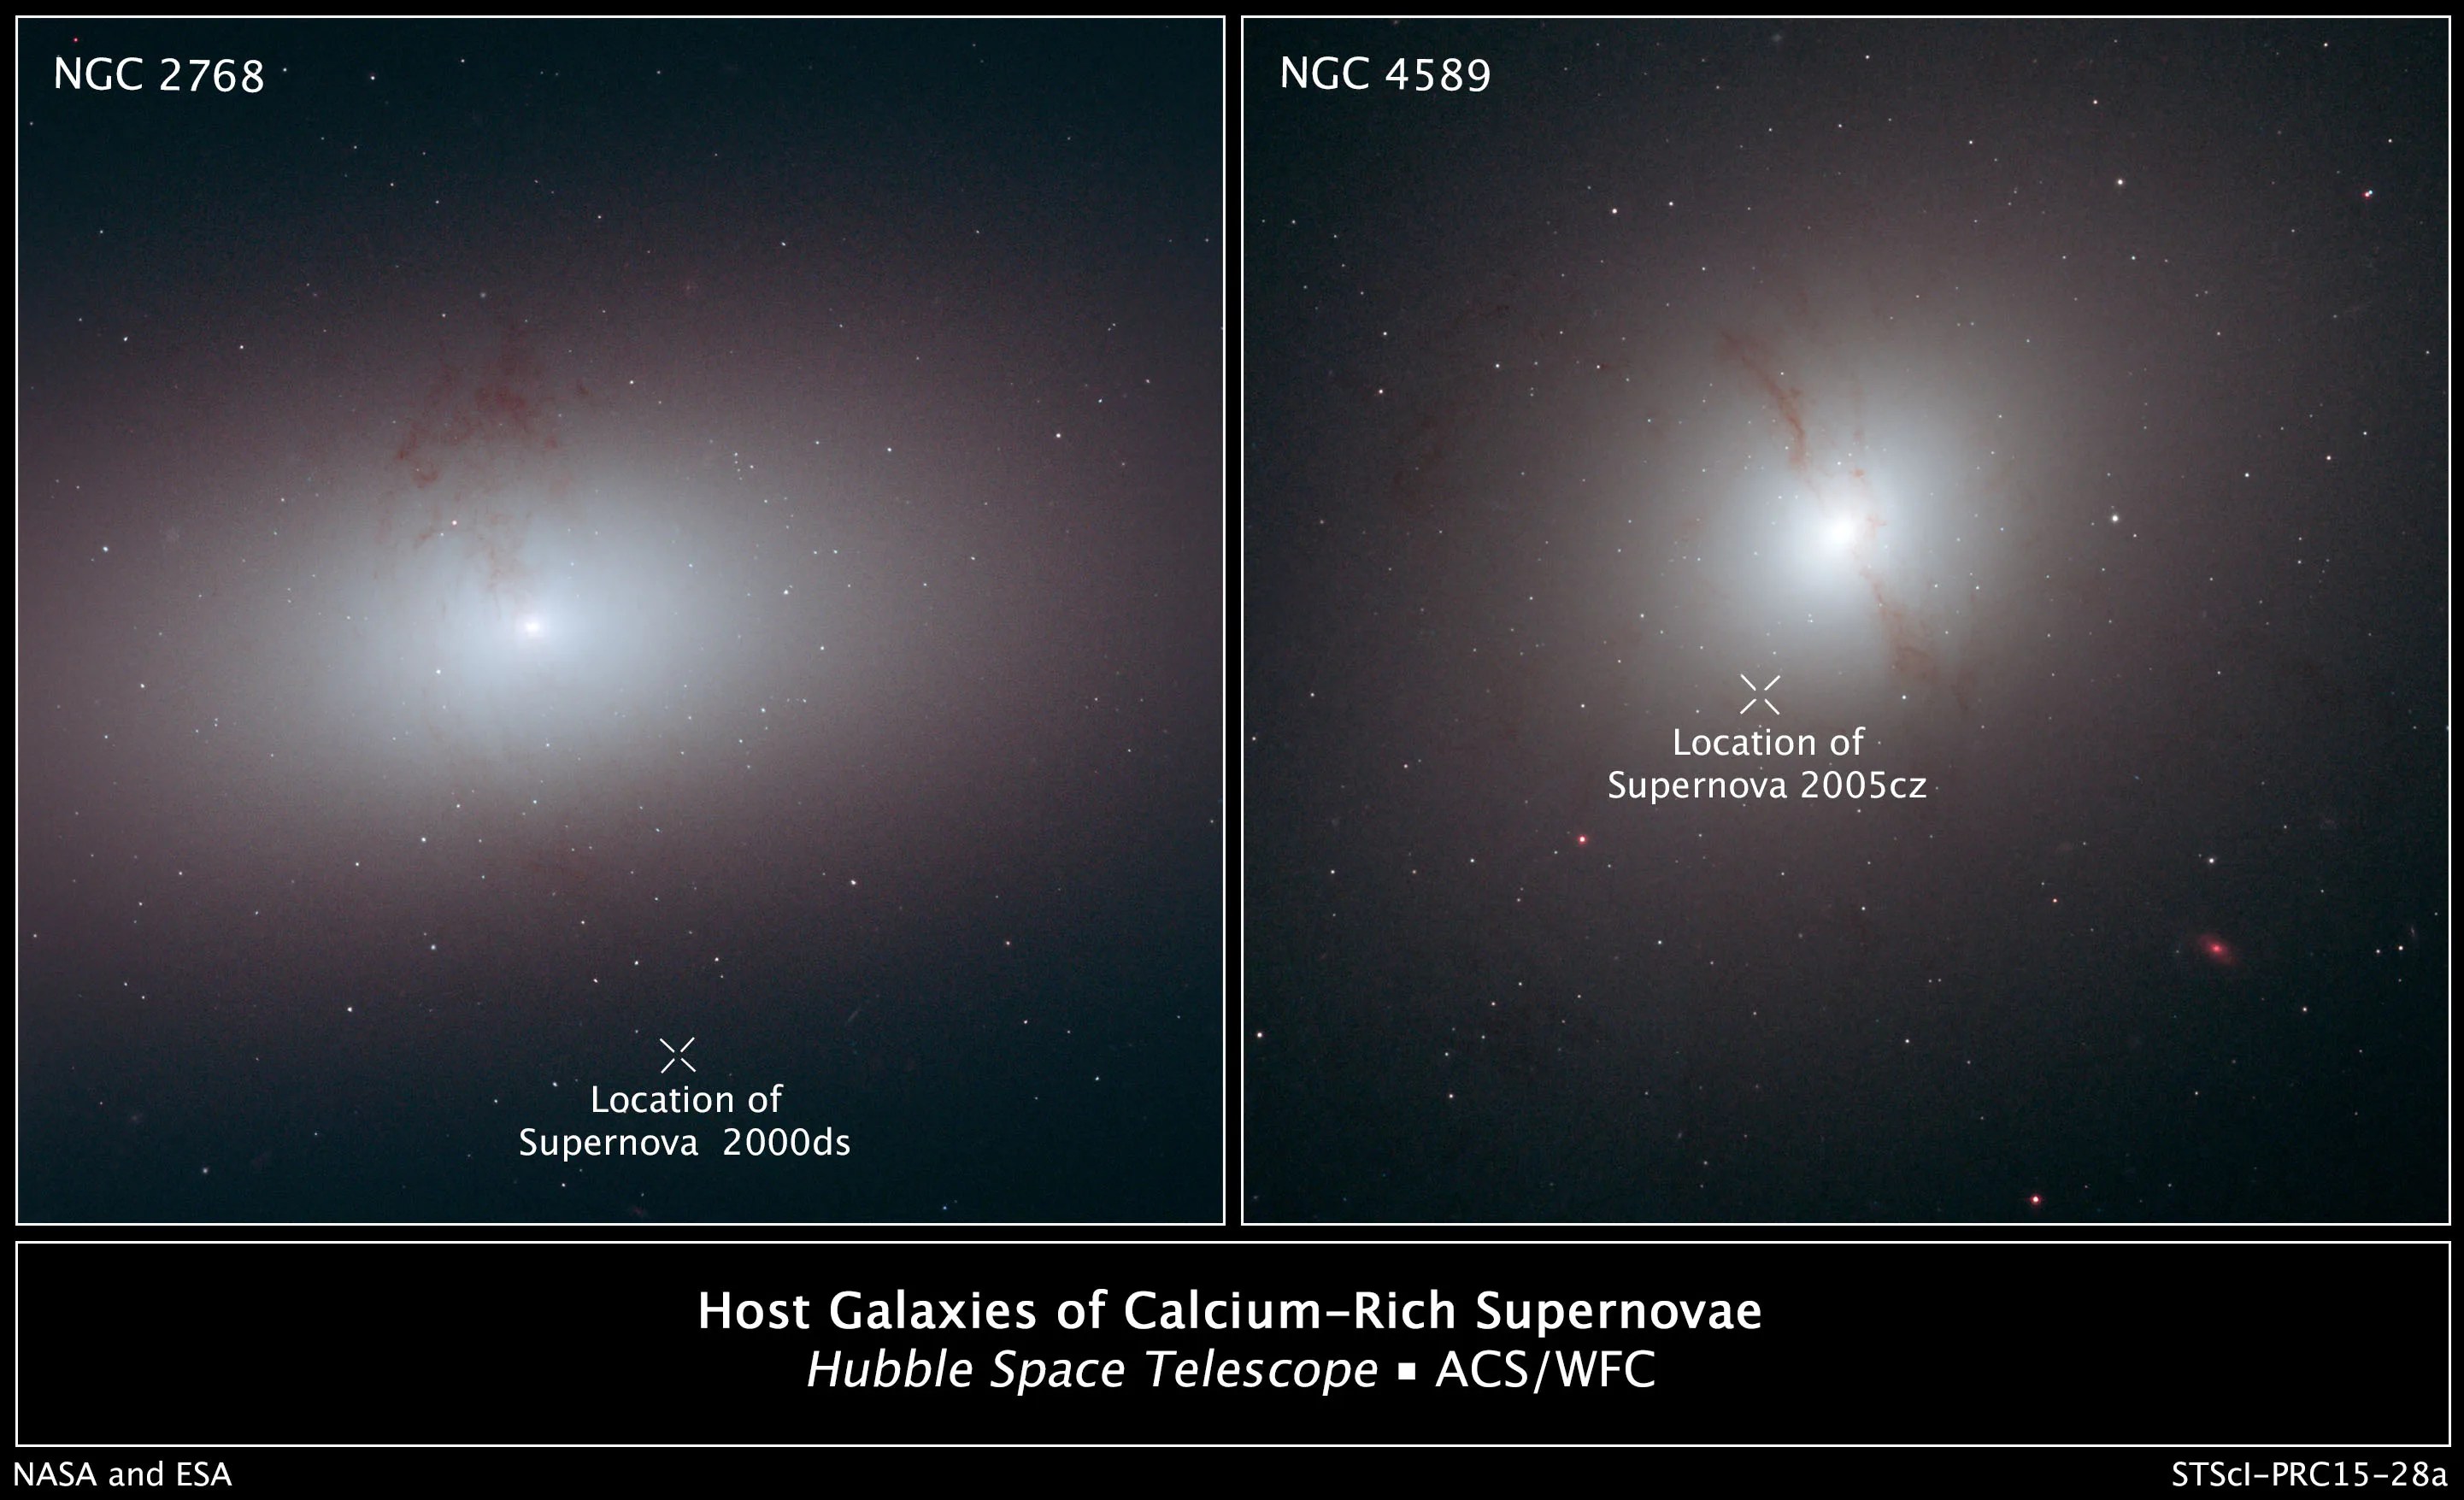 Hubble images of galaxies NGC 2768 and NGC 4589 with the locations of supernovae 2000ds and 2005cz marked, respectively.